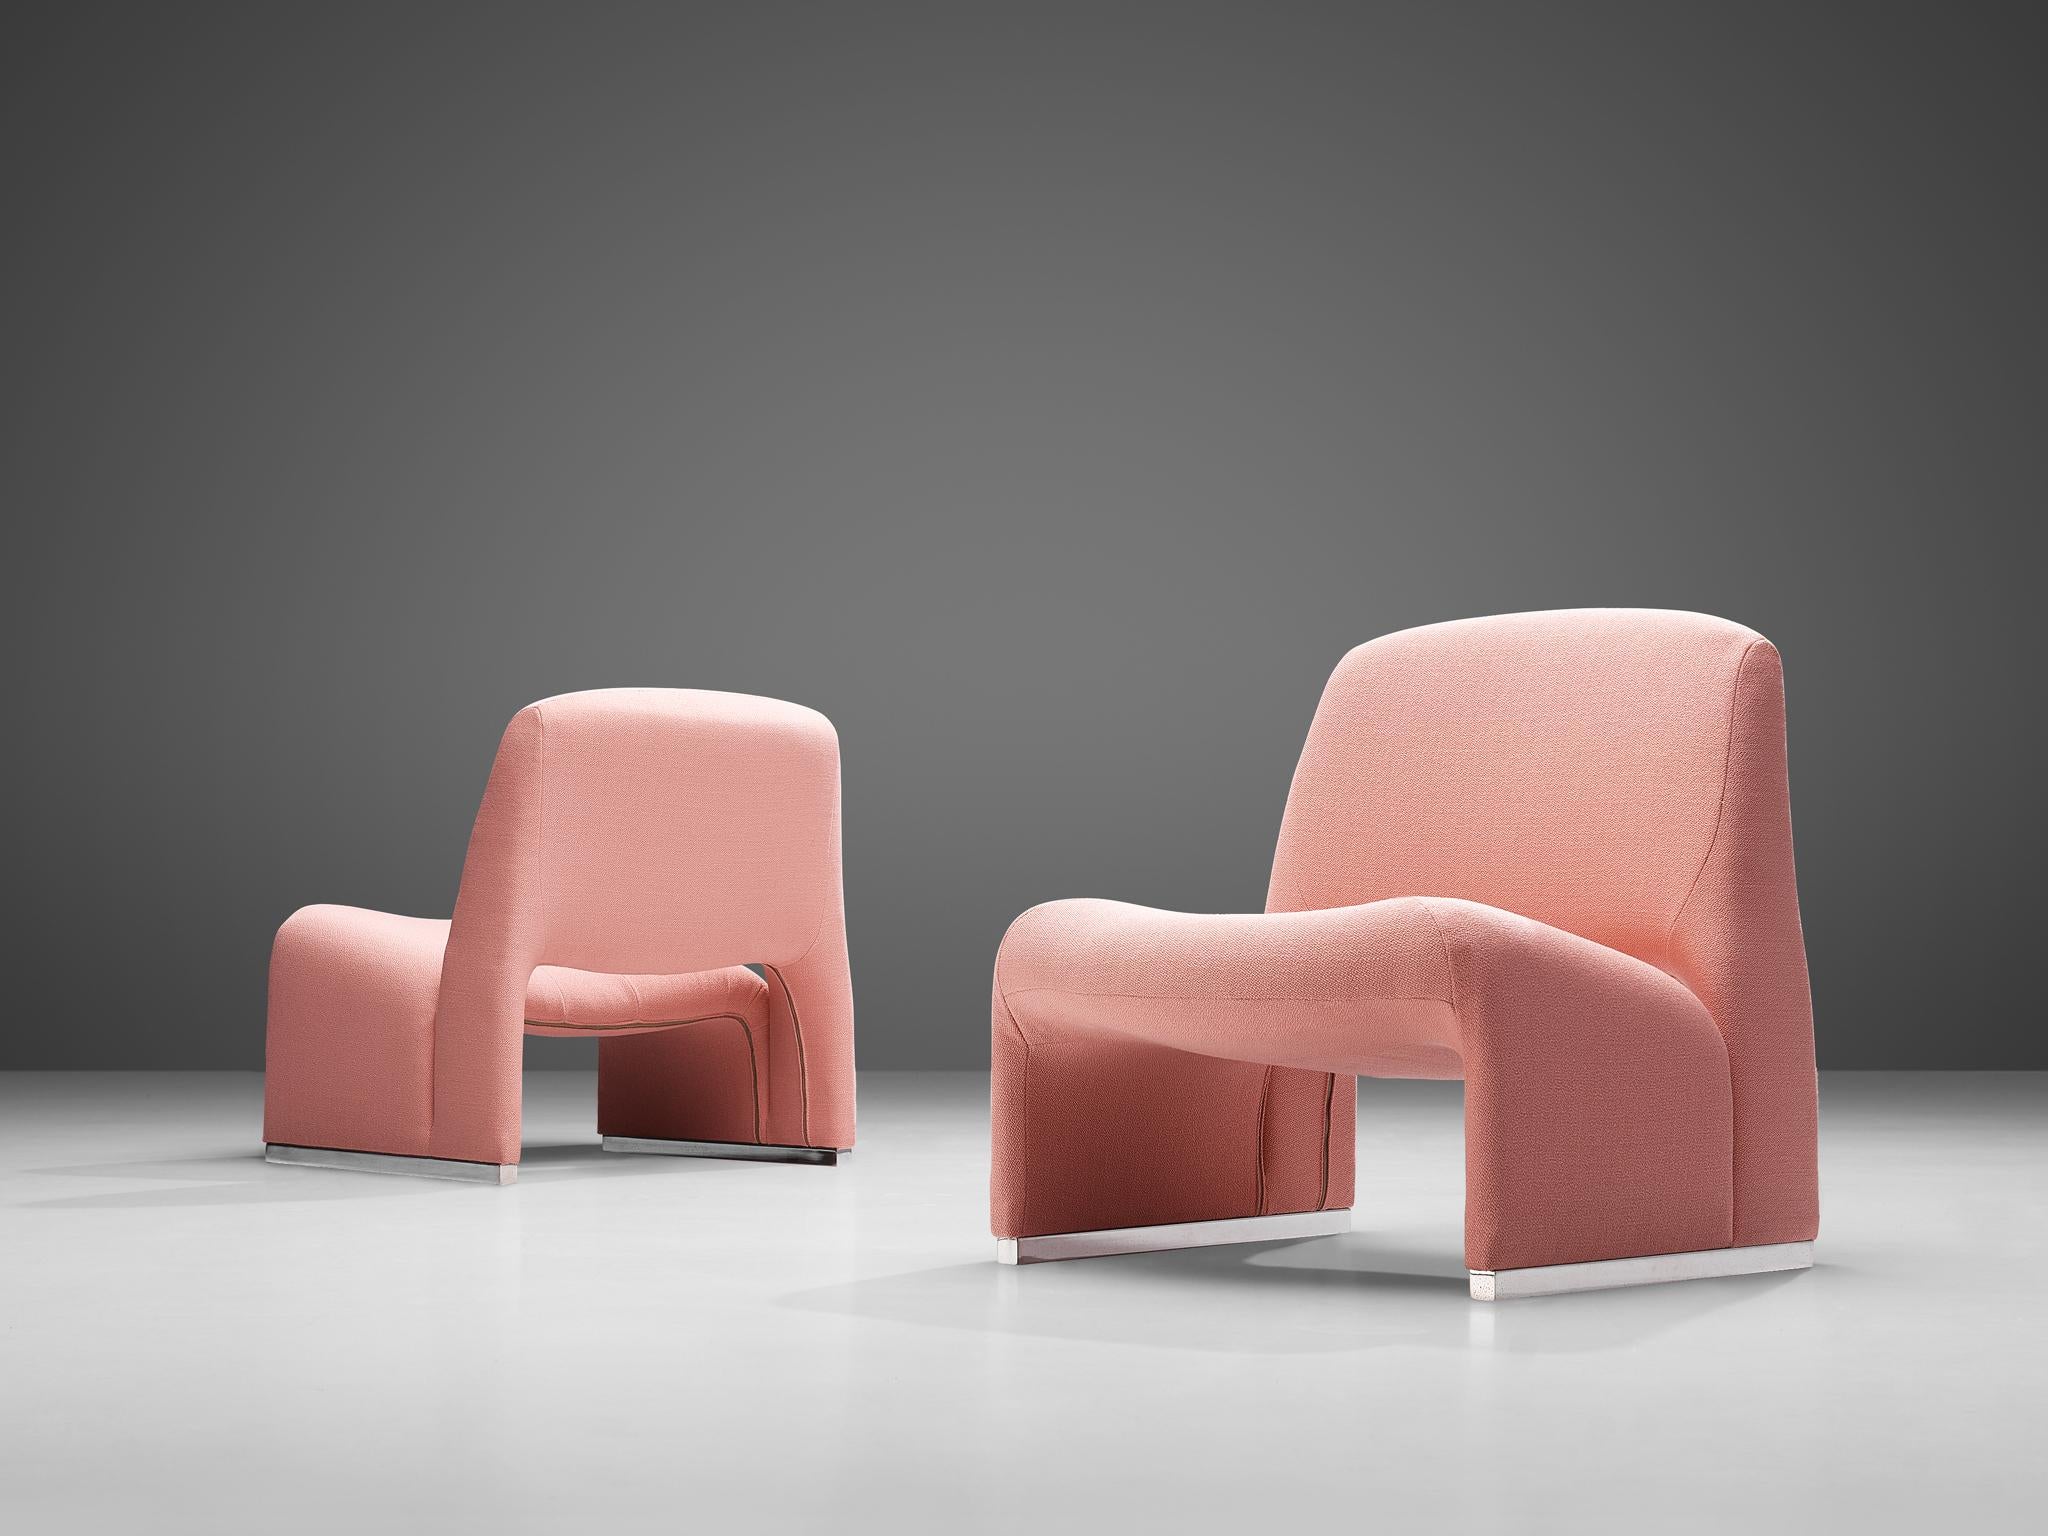 Lounge chairs, pink fabric, metal, Italy, 1970s

These lounge chairs strongly remind of Giancarlo Piretti’s ‘Alky’ lounge chair (1969), yet they feature characteristic differences. Whereas the ‘Alky’ lounge chair consists of one shell, these chairs